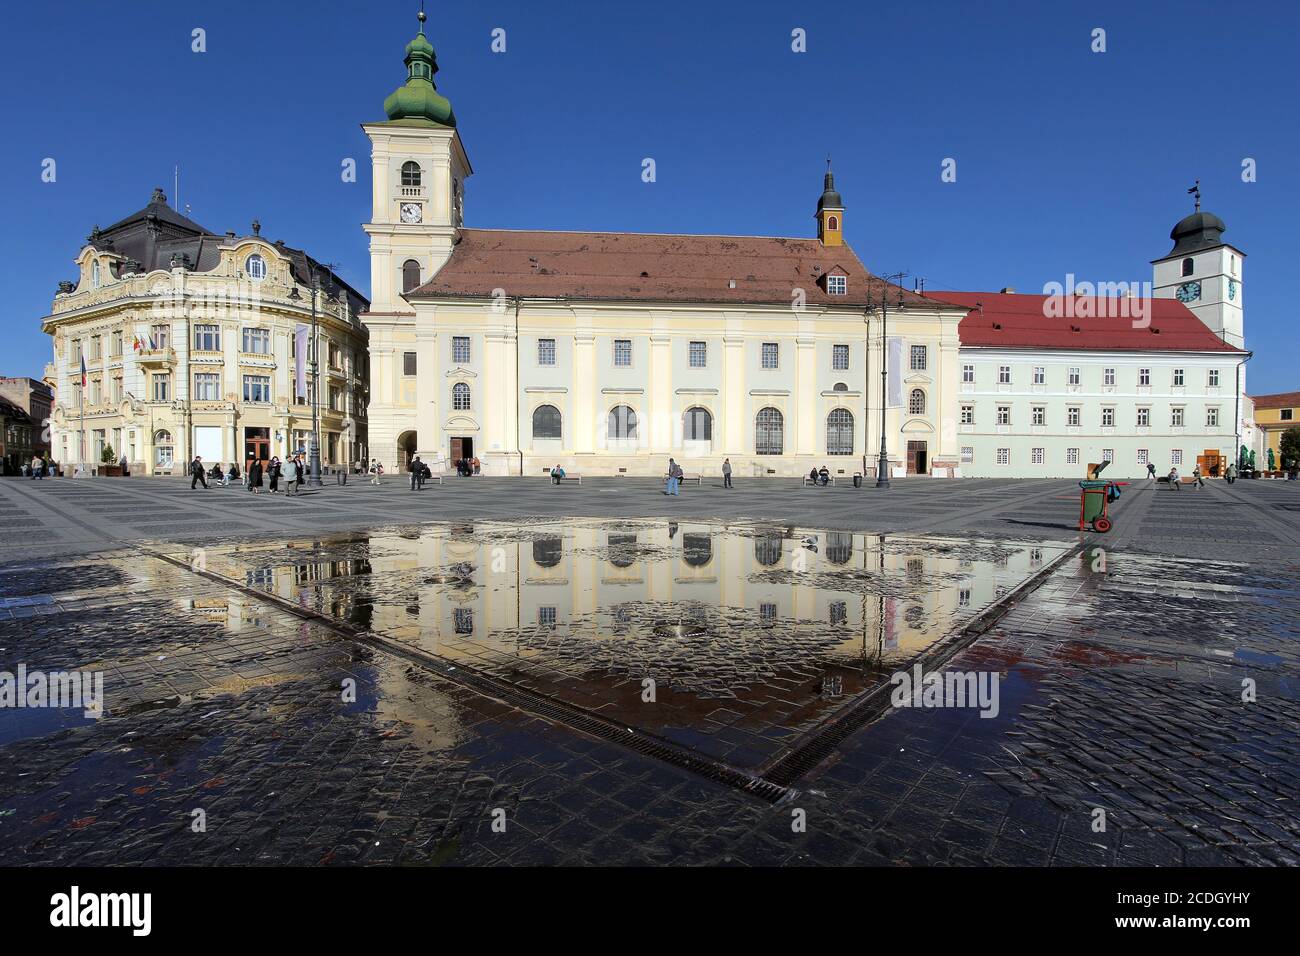 Grand Square (Piata Mare) is the main town square of Sibiu, Romania. Day-time scene capturing on the left the City Hall, the Catholic Church and the r Stock Photo